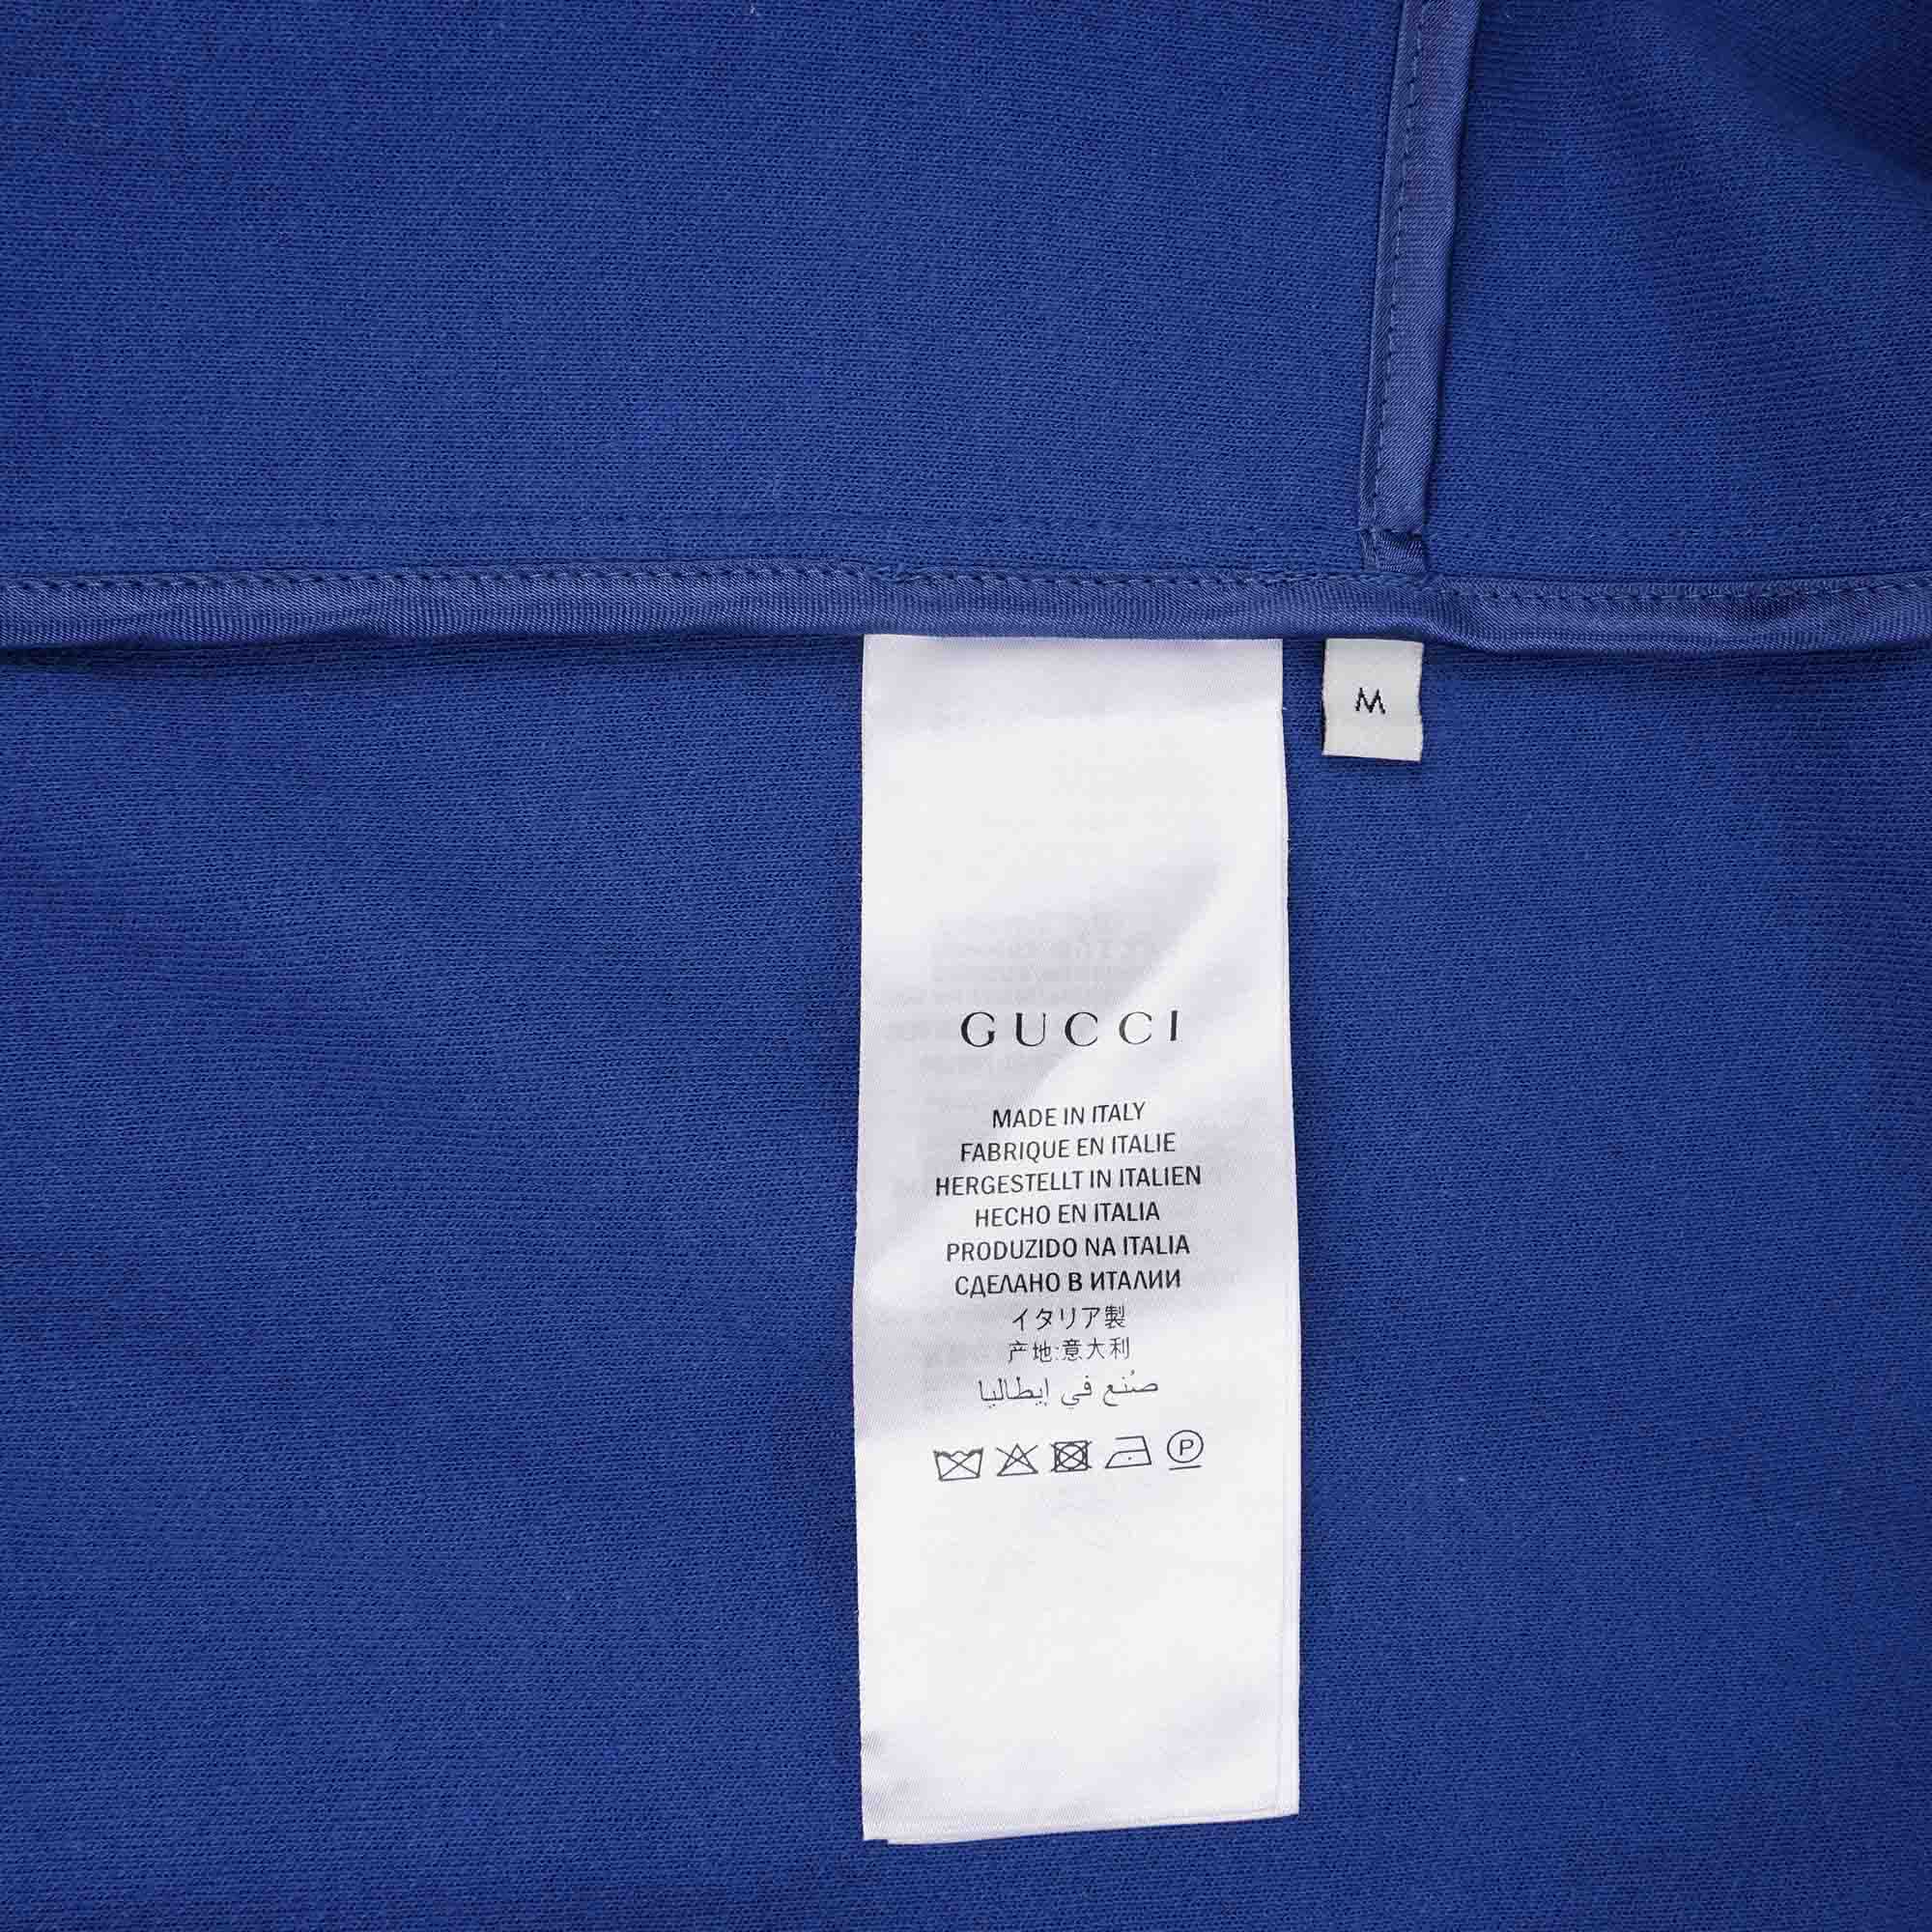 GG Technical Jersey Jacket M - GUCCI - Affordable Luxury image